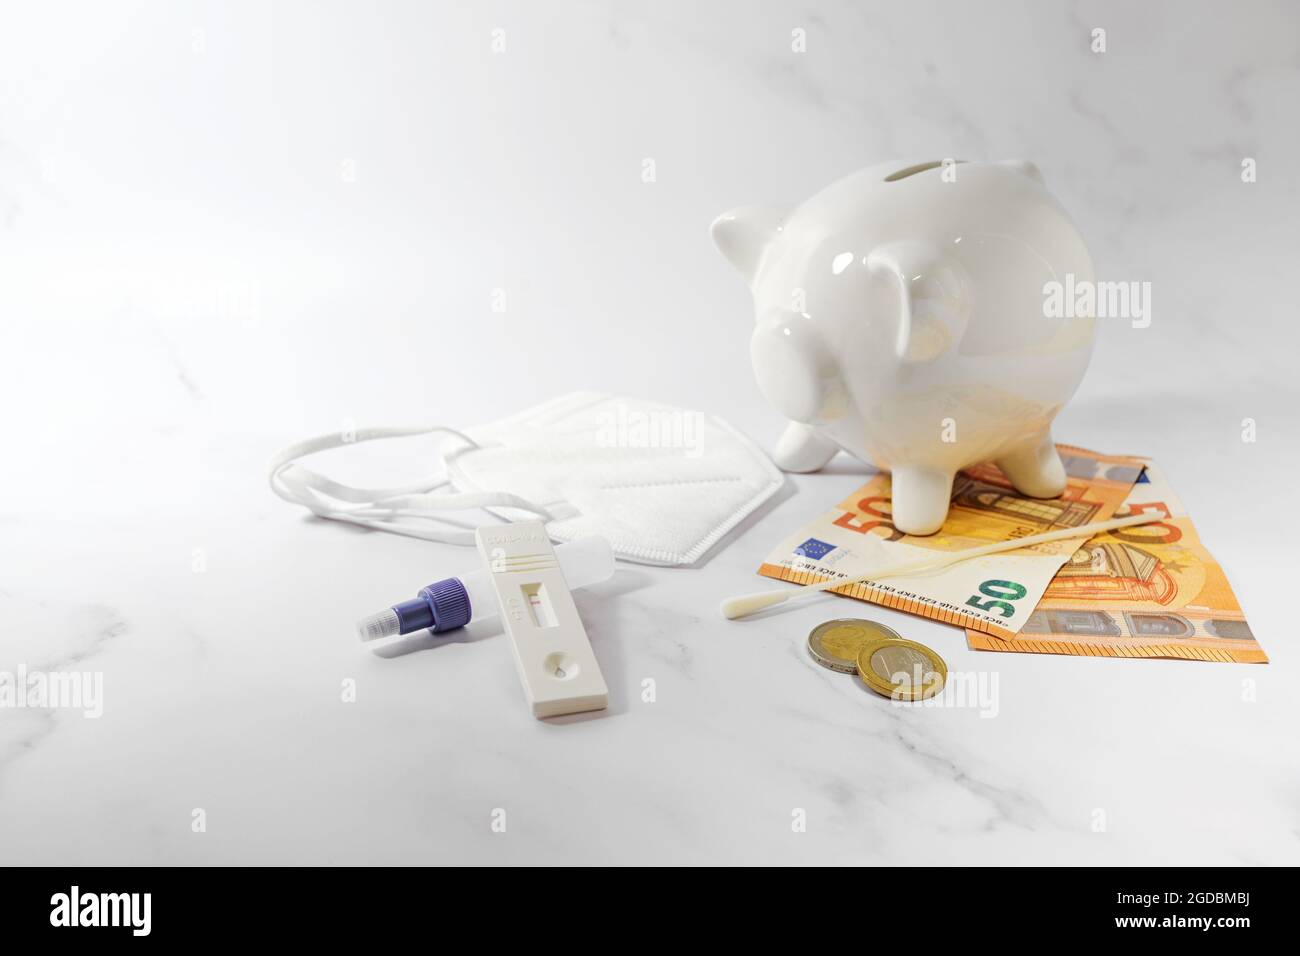 Covid-19 rapid test kit, euro notes and coins, piggy bank and a ffp2 face mask on a gray background, concept for health care costs during coronavirus Stock Photo